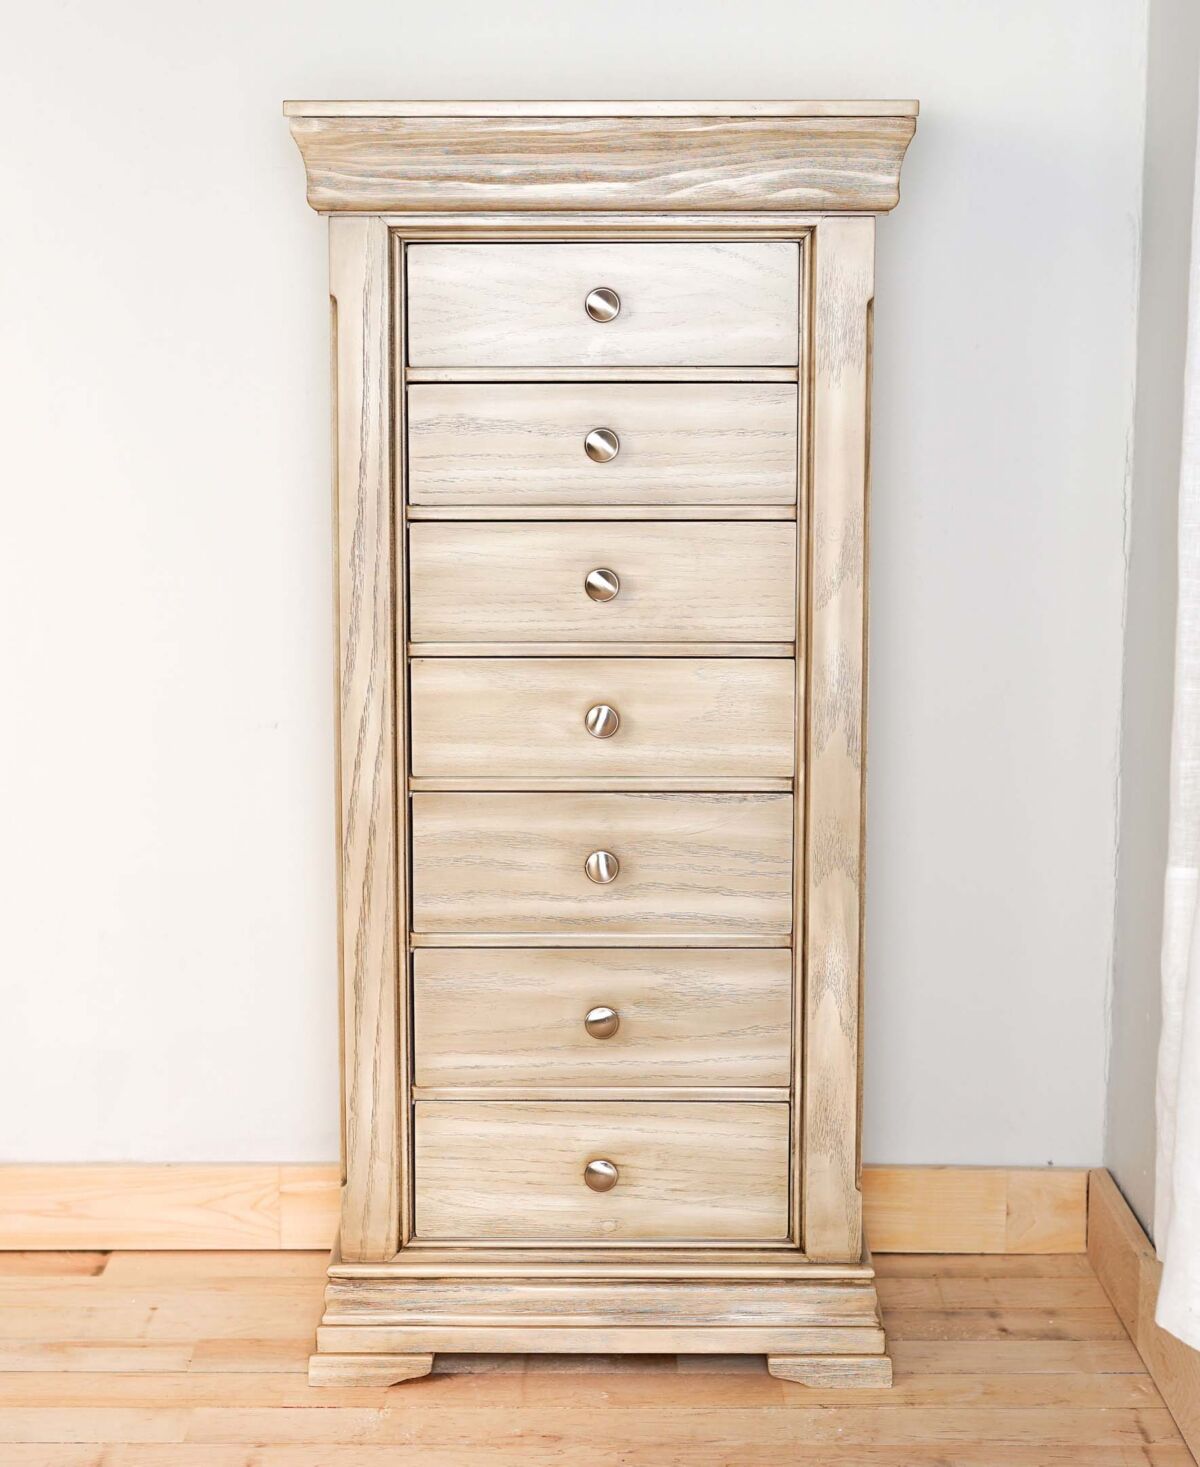 Hives & Honey Haley Jewelry Armoire - Taupe